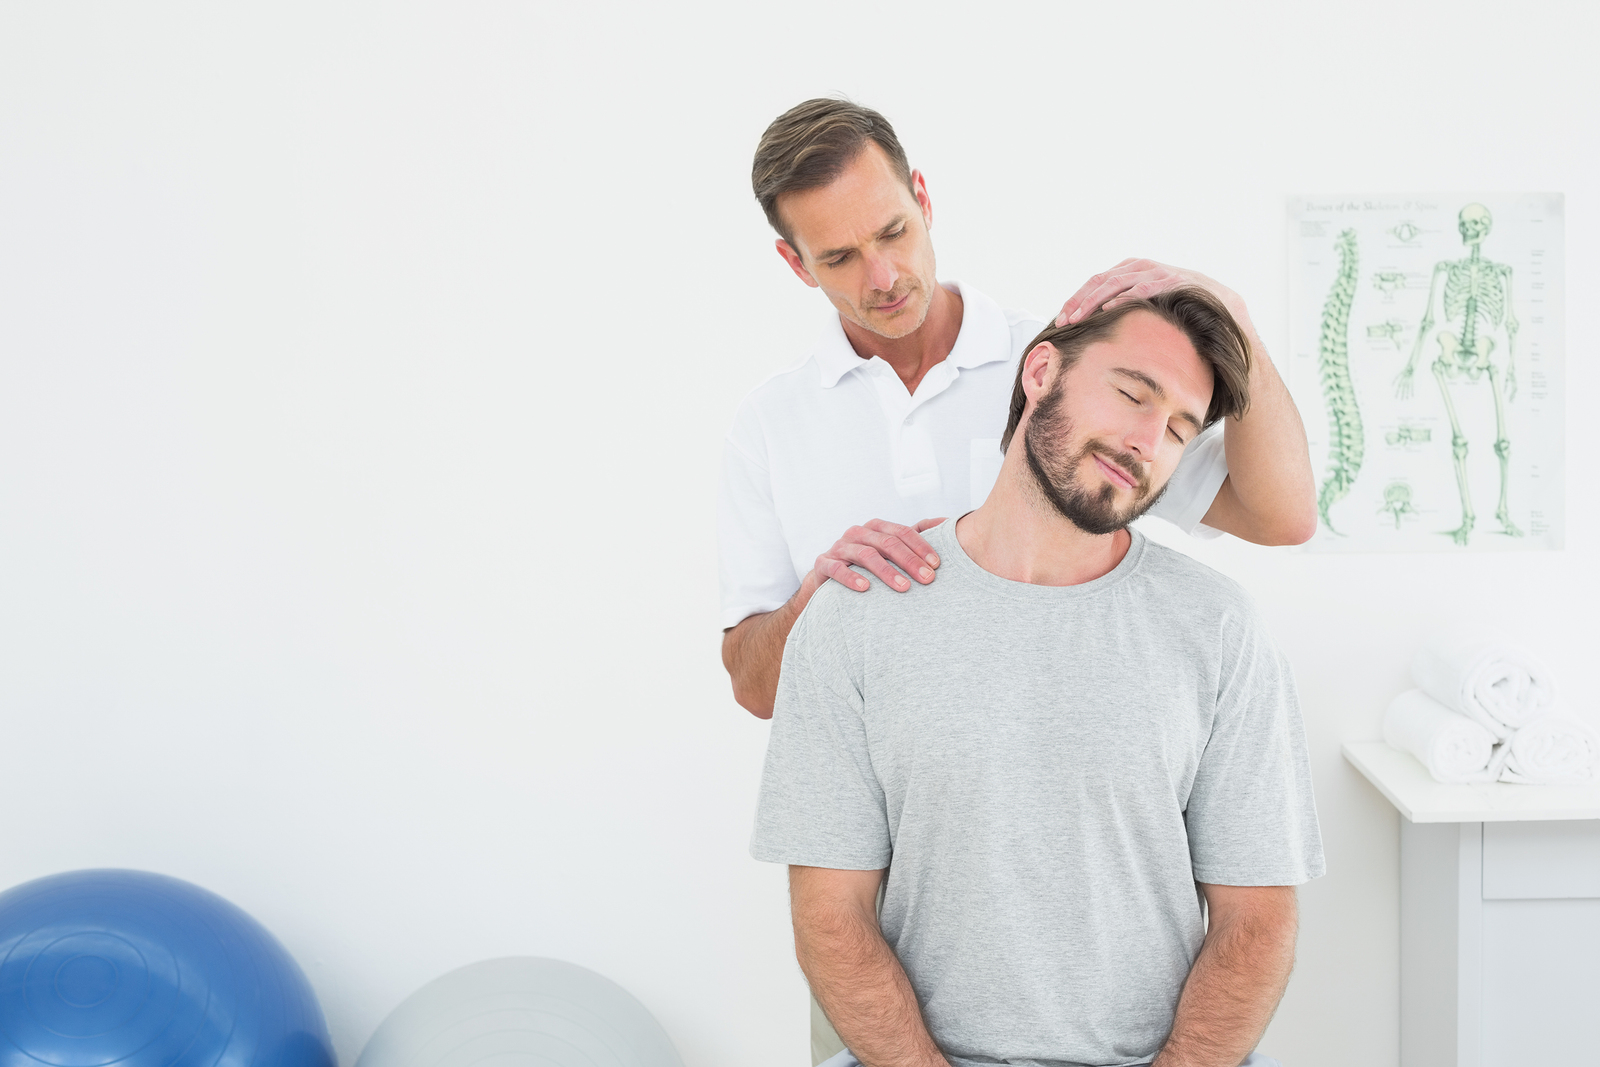 Benefits of Physiotherapy for Everyday Life